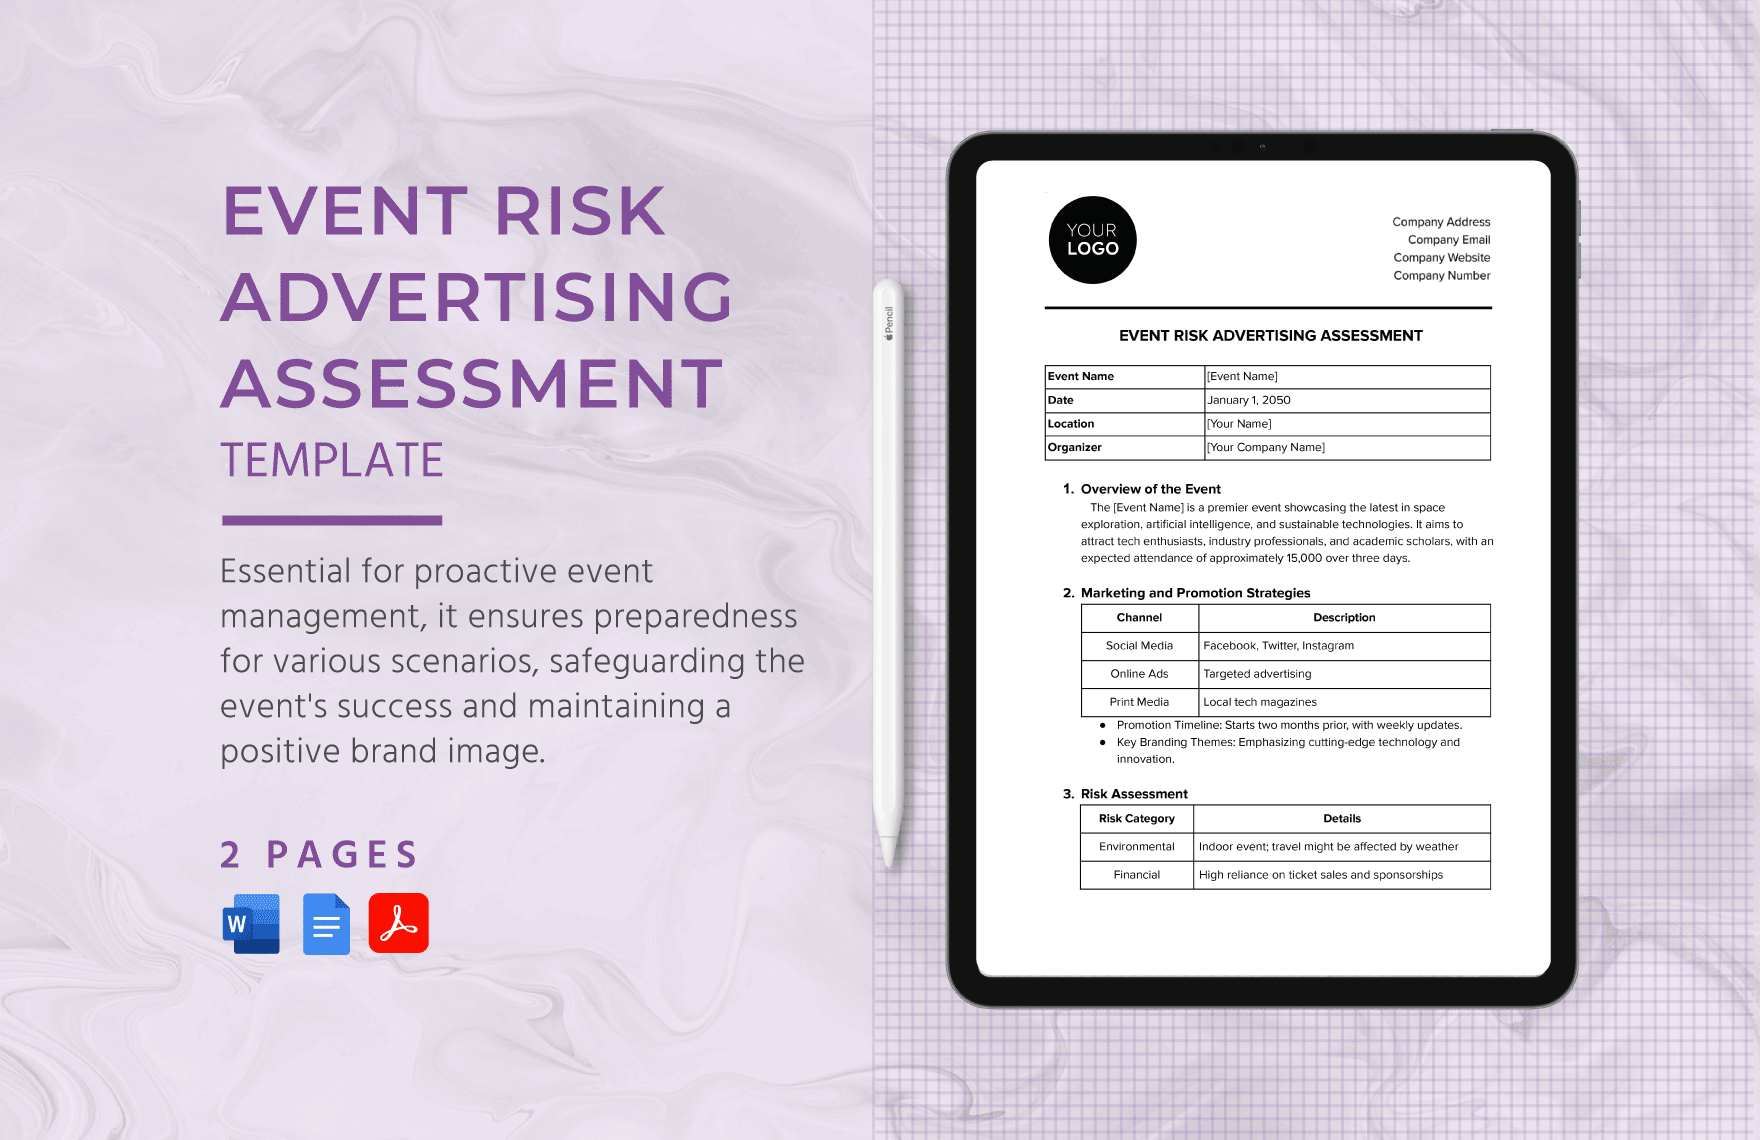 Event Risk Advertising Assessment Template in Word, Google Docs, PDF